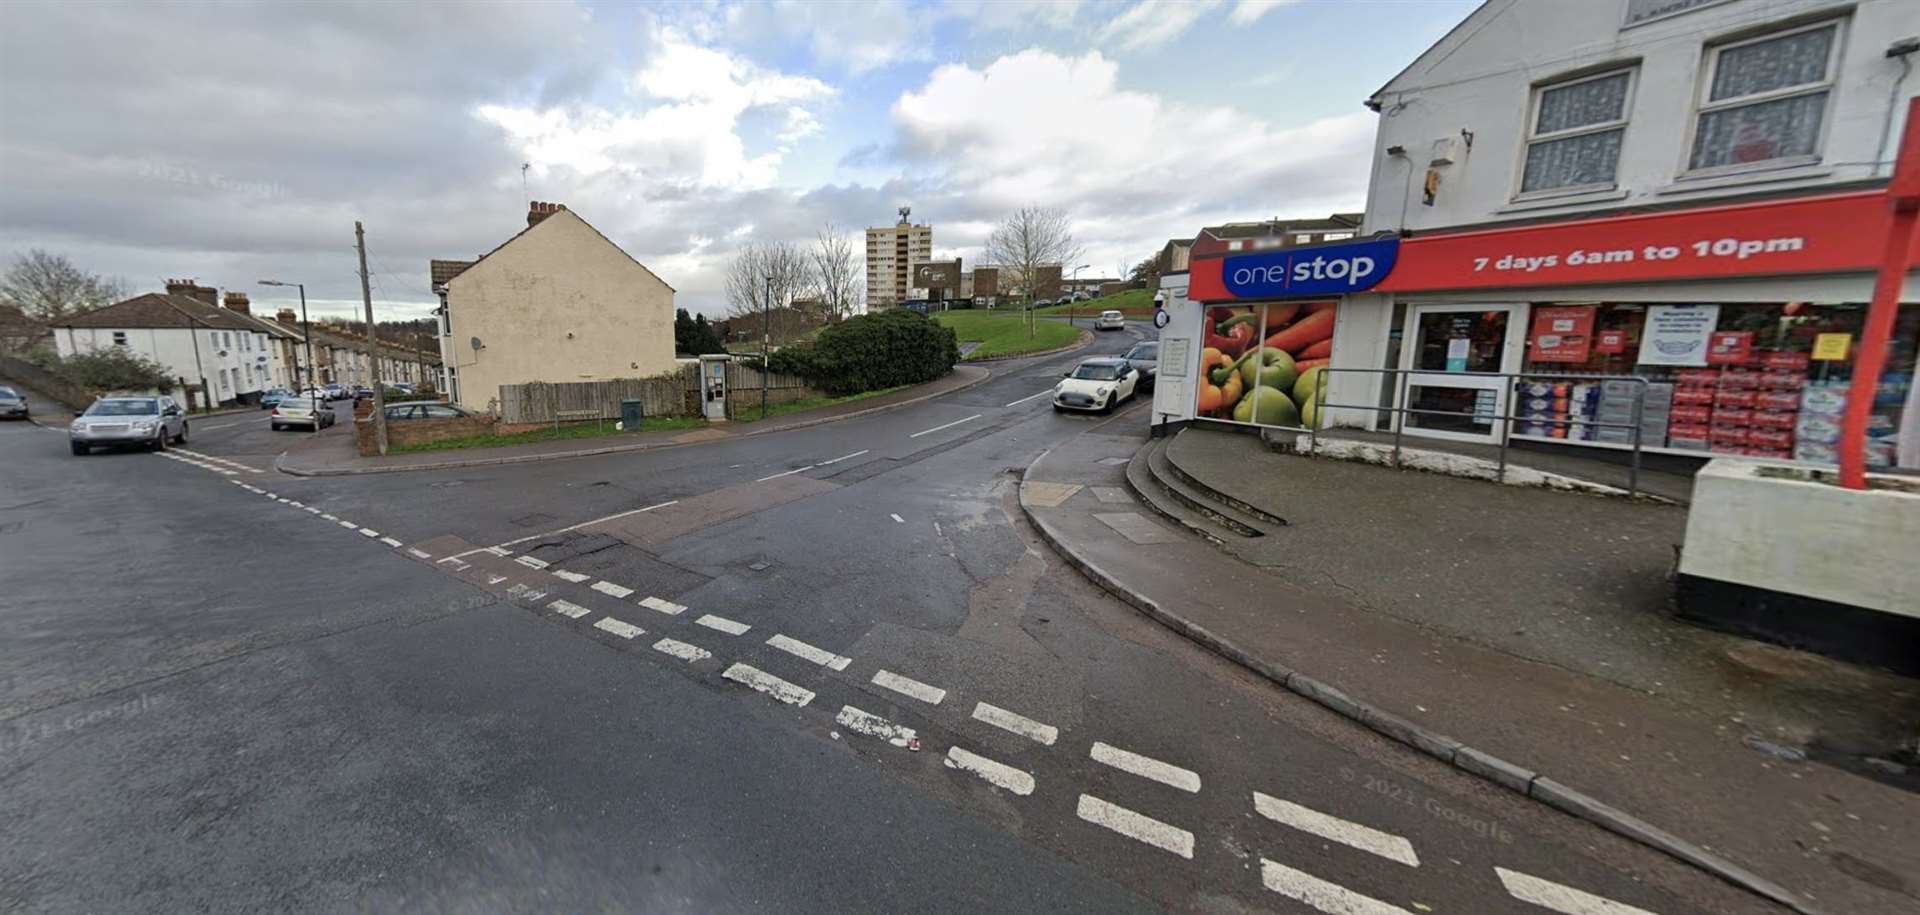 He was initially approached outside a shop in Magpie Hall Road and Shipwrights Avenue. Picture: Google Street View